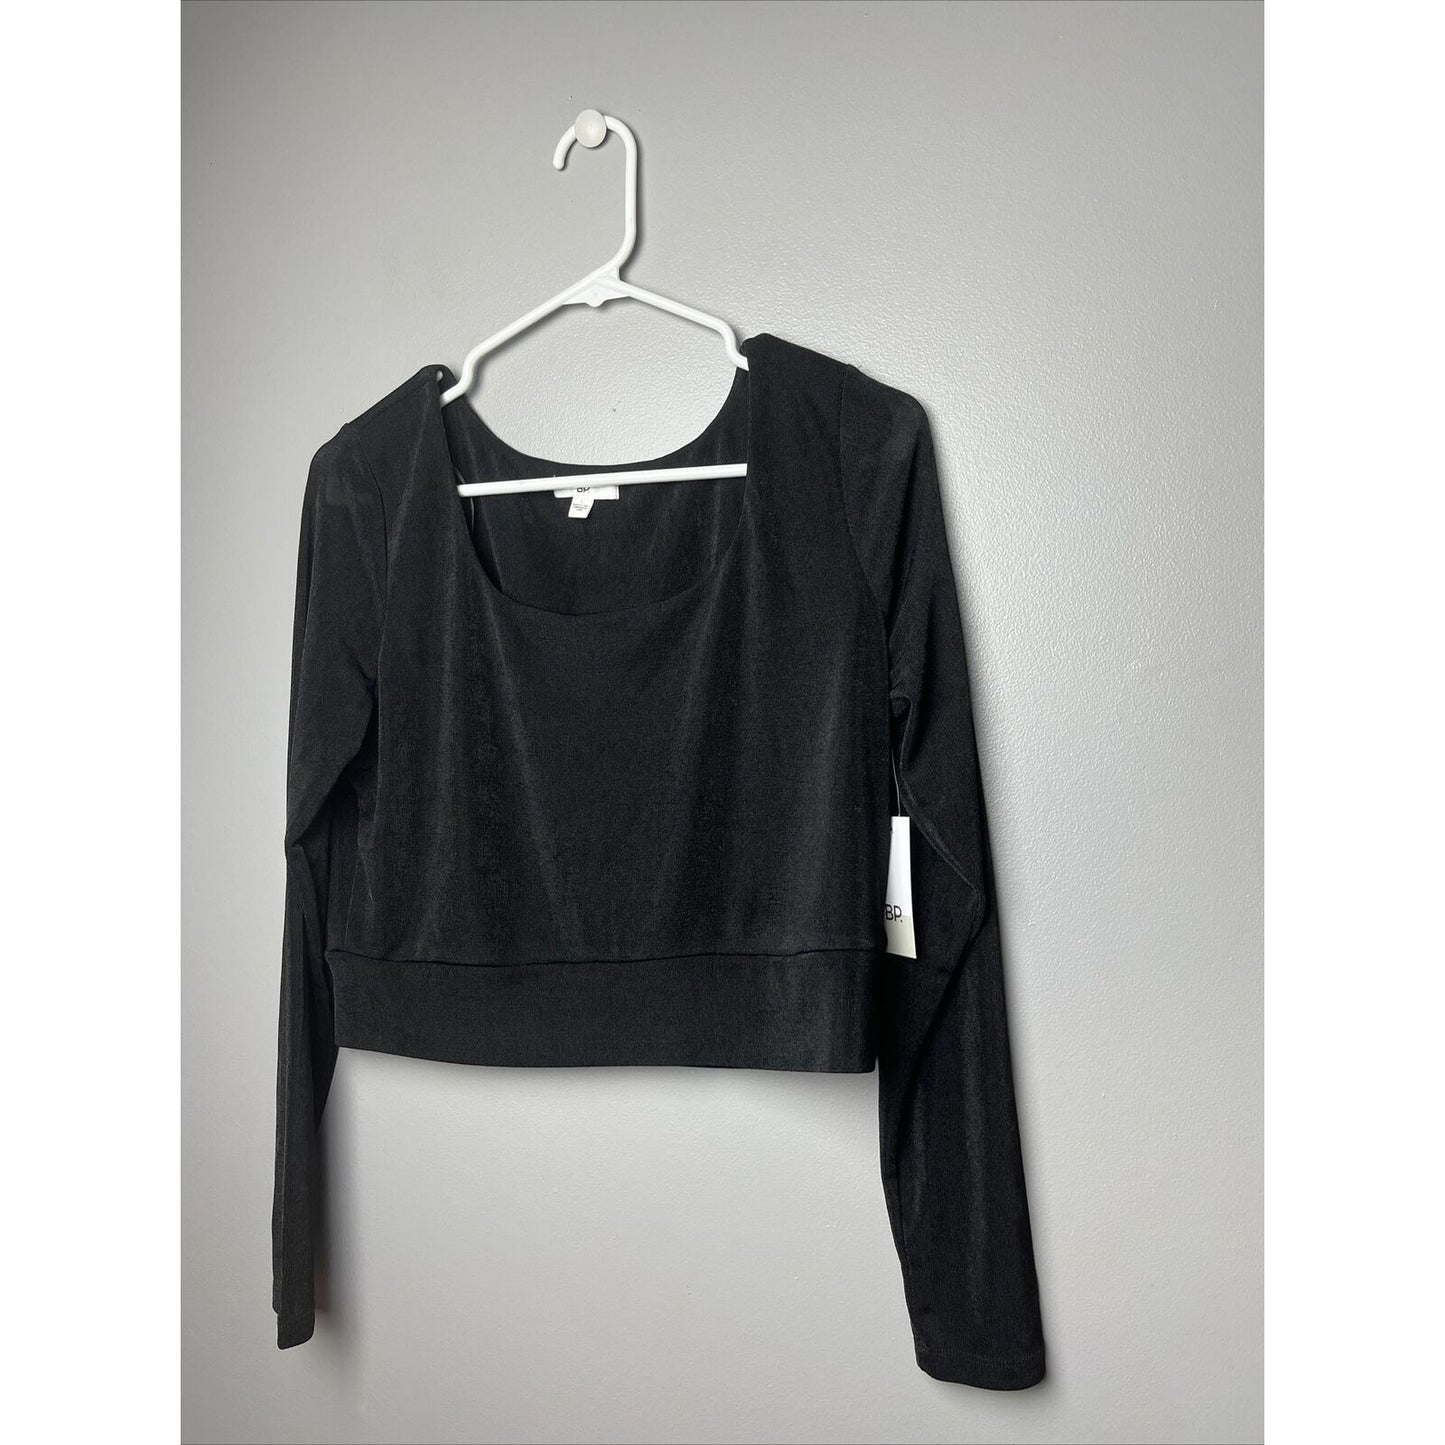 *BP* Black Cropped Long Sleeve Square Neck Top - NWT - Size Large